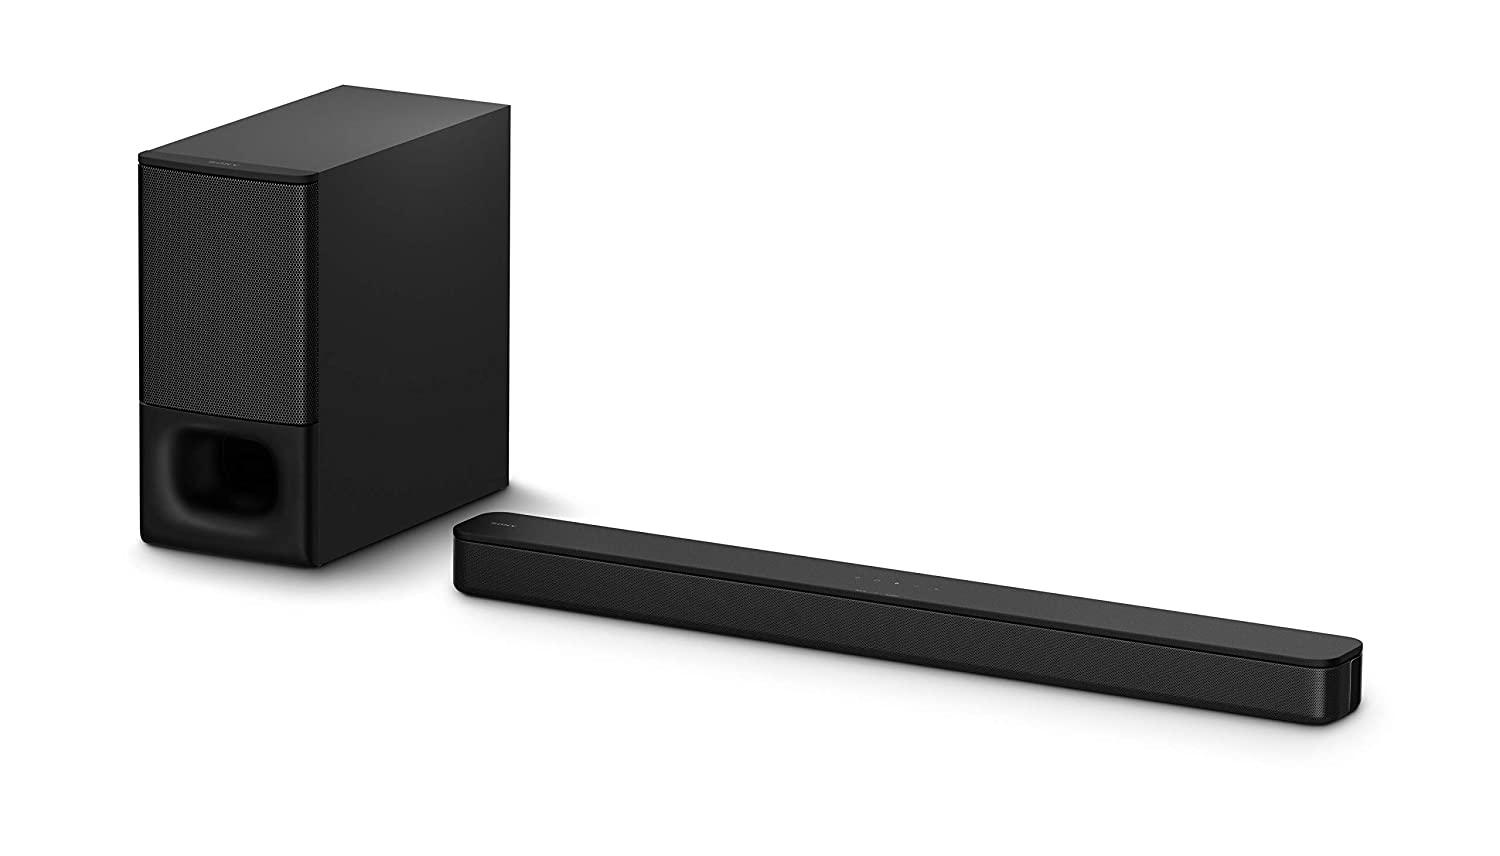 Amazon Deal: This Sony Speaker and Sound Bar will rock the Christmas, New Year and every party, buy 40% less in this offer